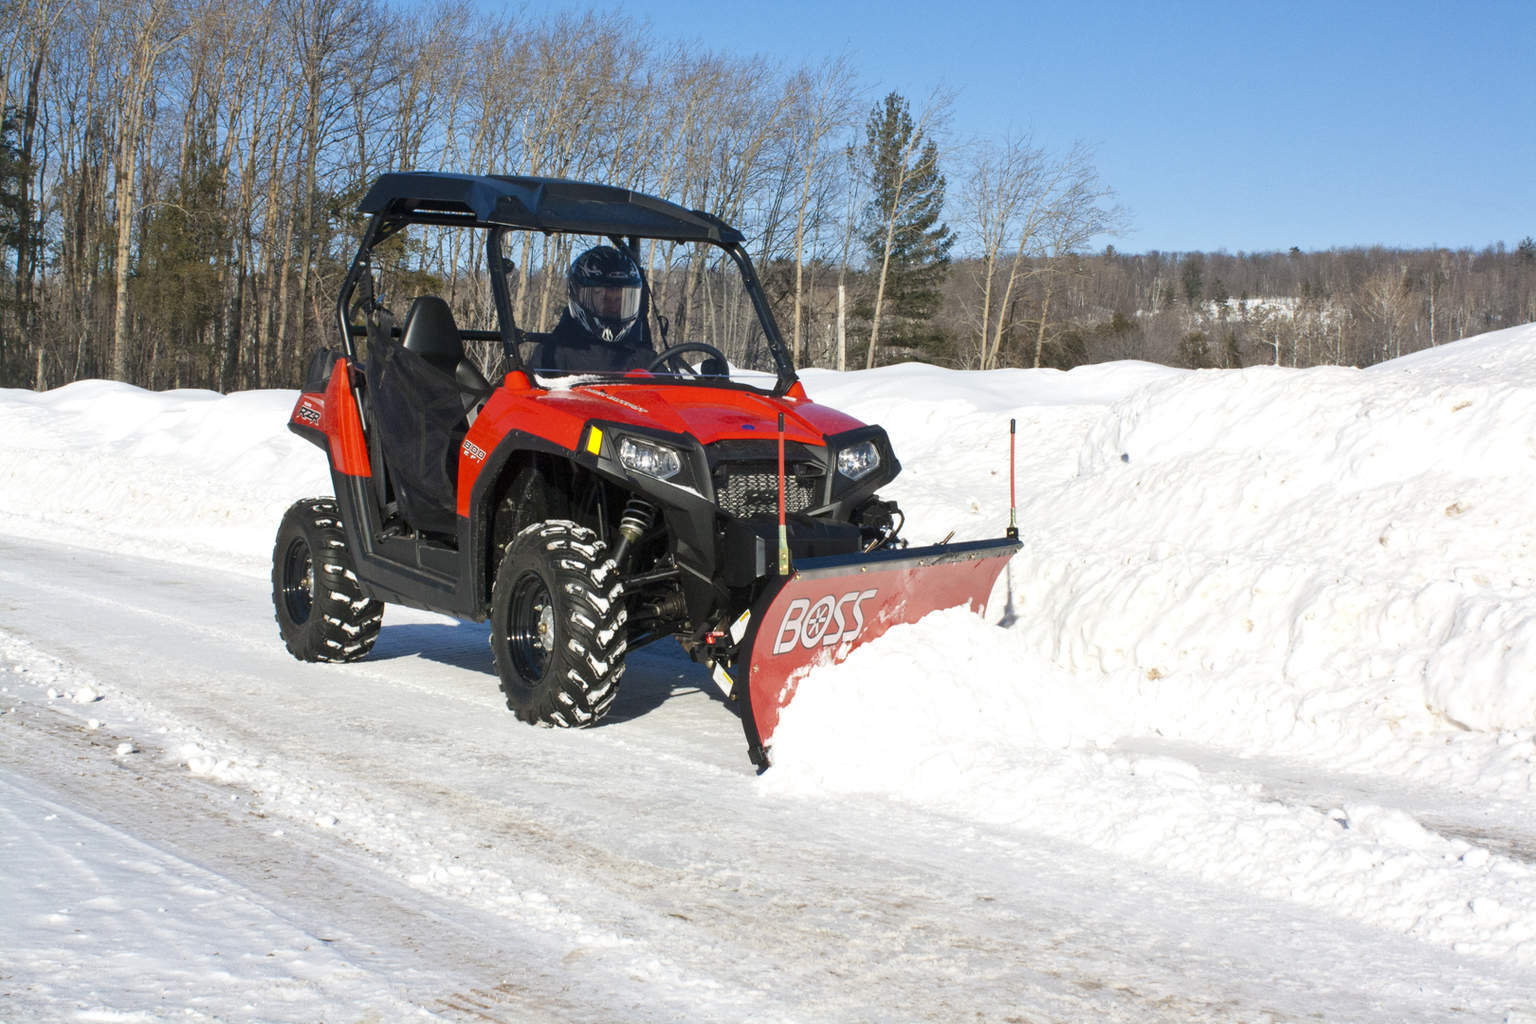 What Everyone Ought to Know Before Purchasing an ATV or UTV Snow Plow